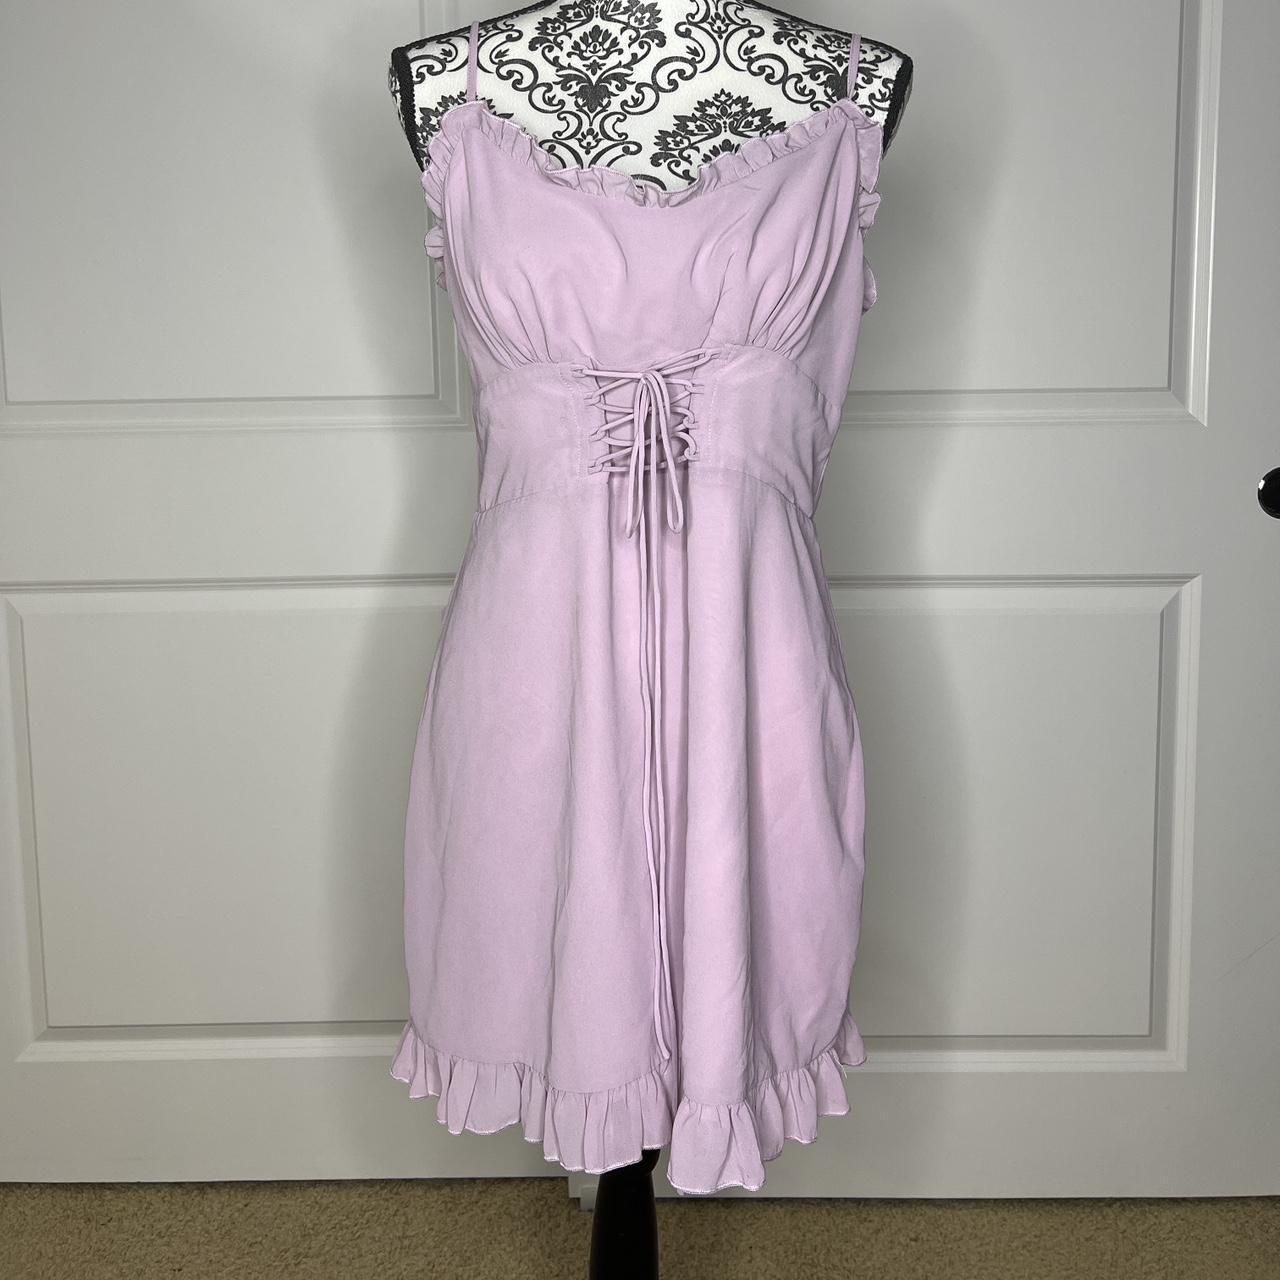 Dusty Lavender Corseted Sugar Thrillz Dress with... - Depop